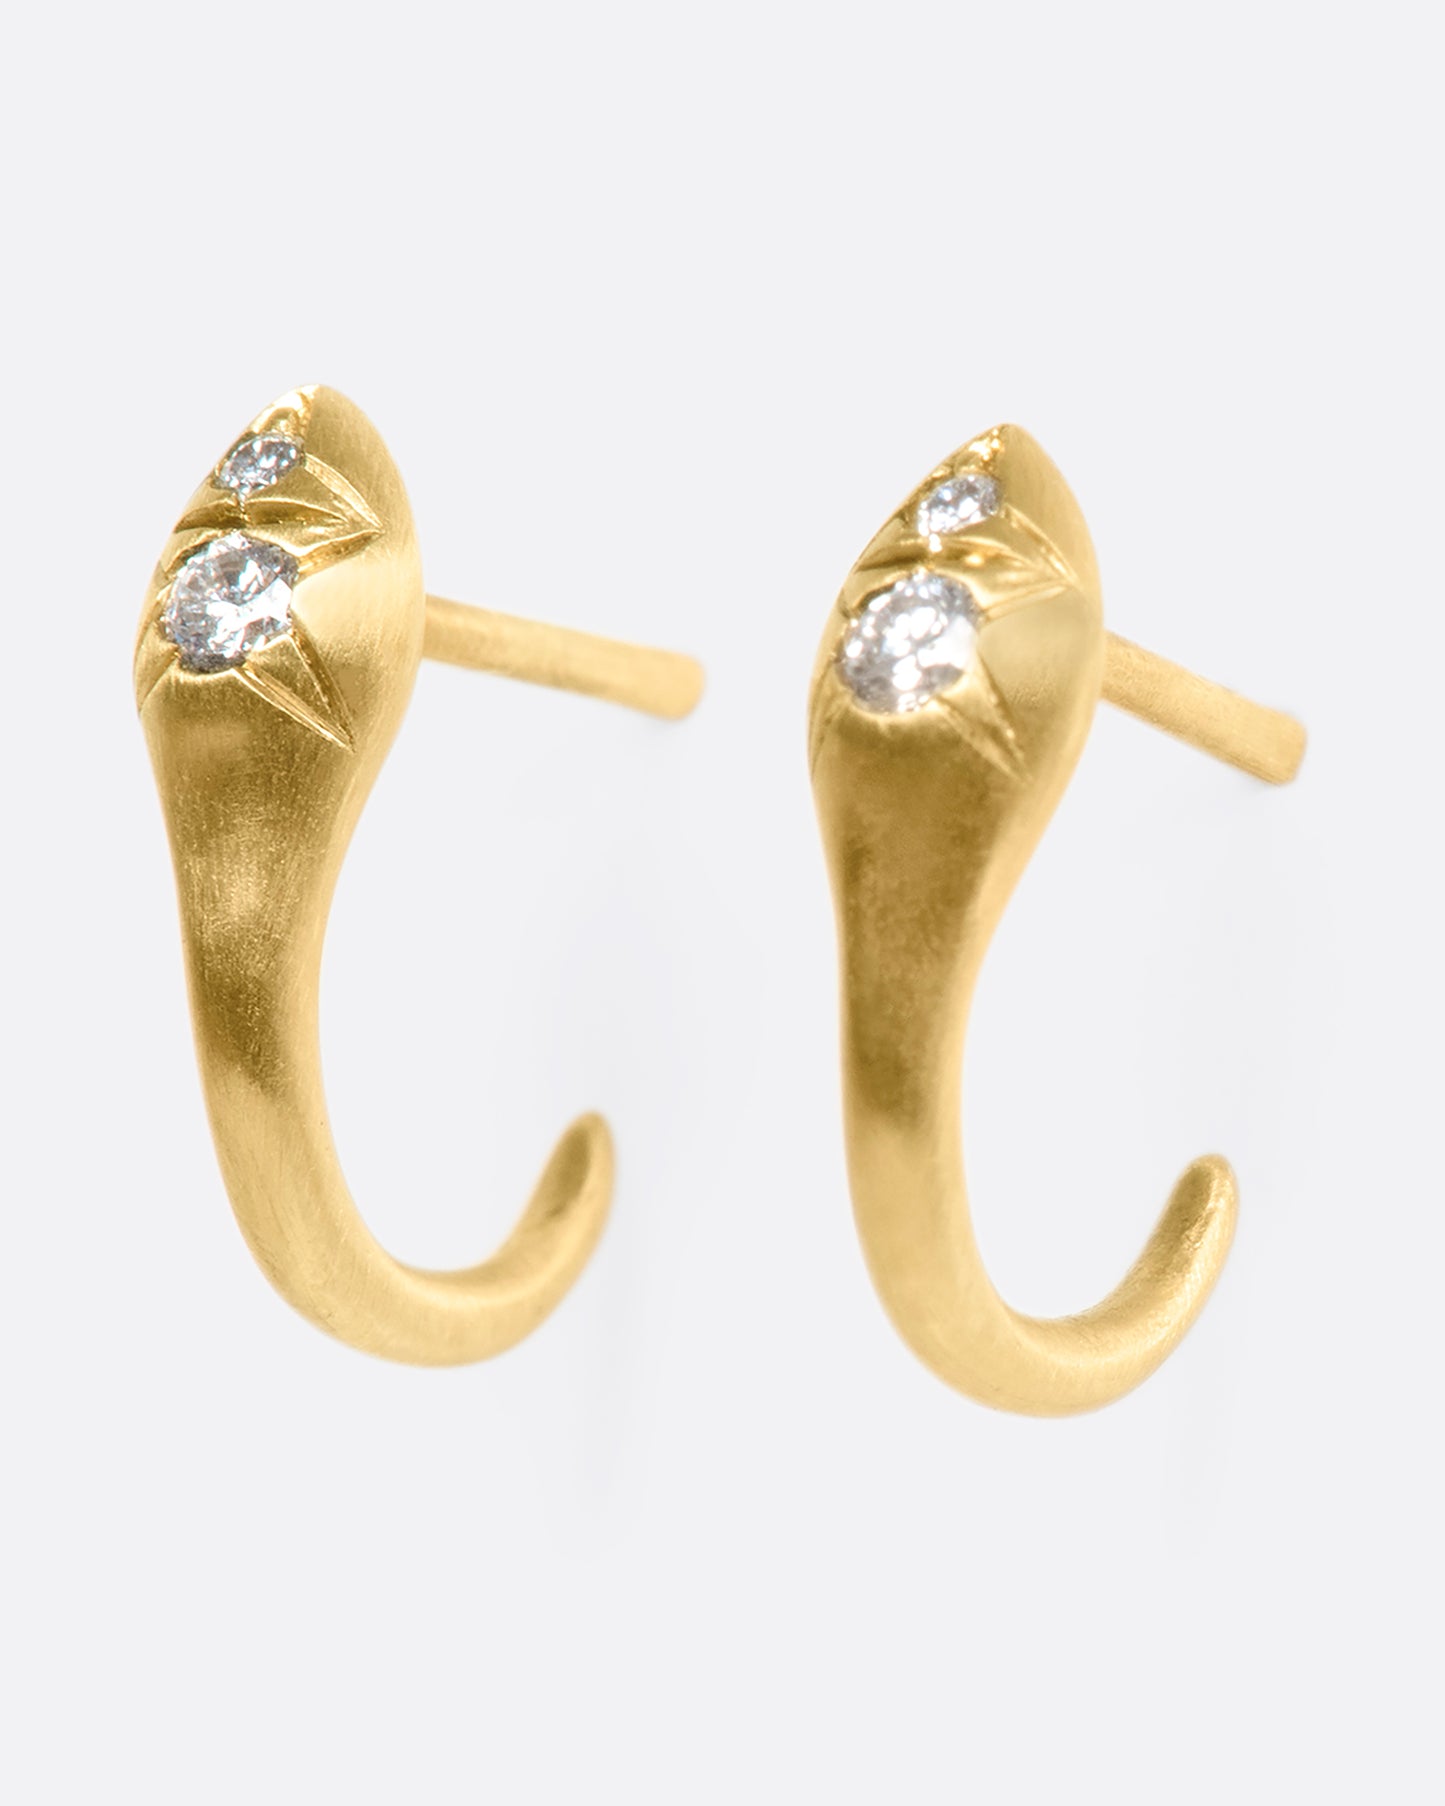 A pair of brushed 10k gold snakes that curl under your ear like tapered huggies